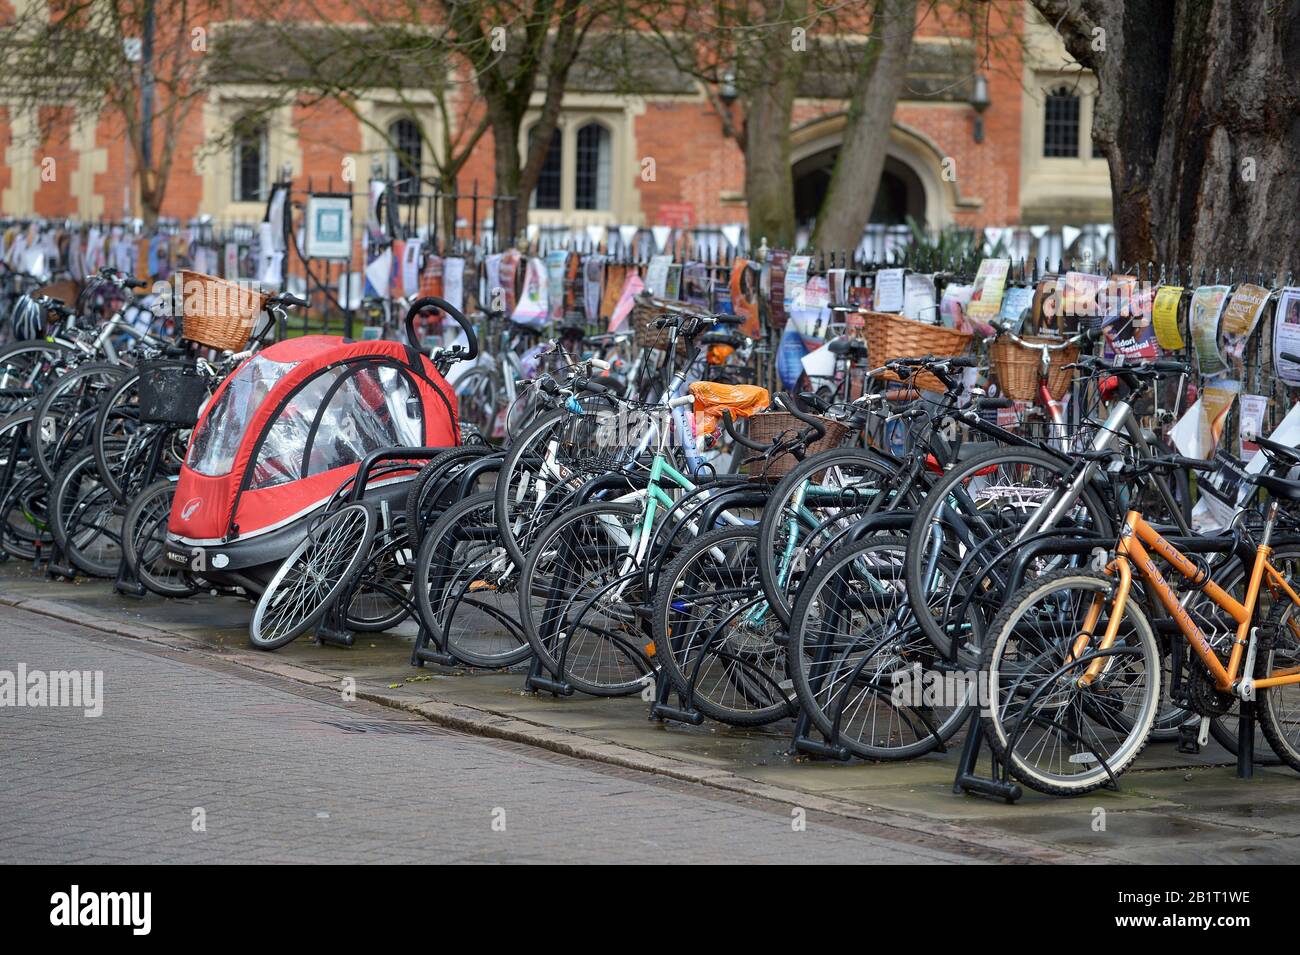 Cambridge England 27th February 2020. Visitors to the City wrap up warm to ride in Punts on the River Cam as snow and sleet cross the UK Stock Photo